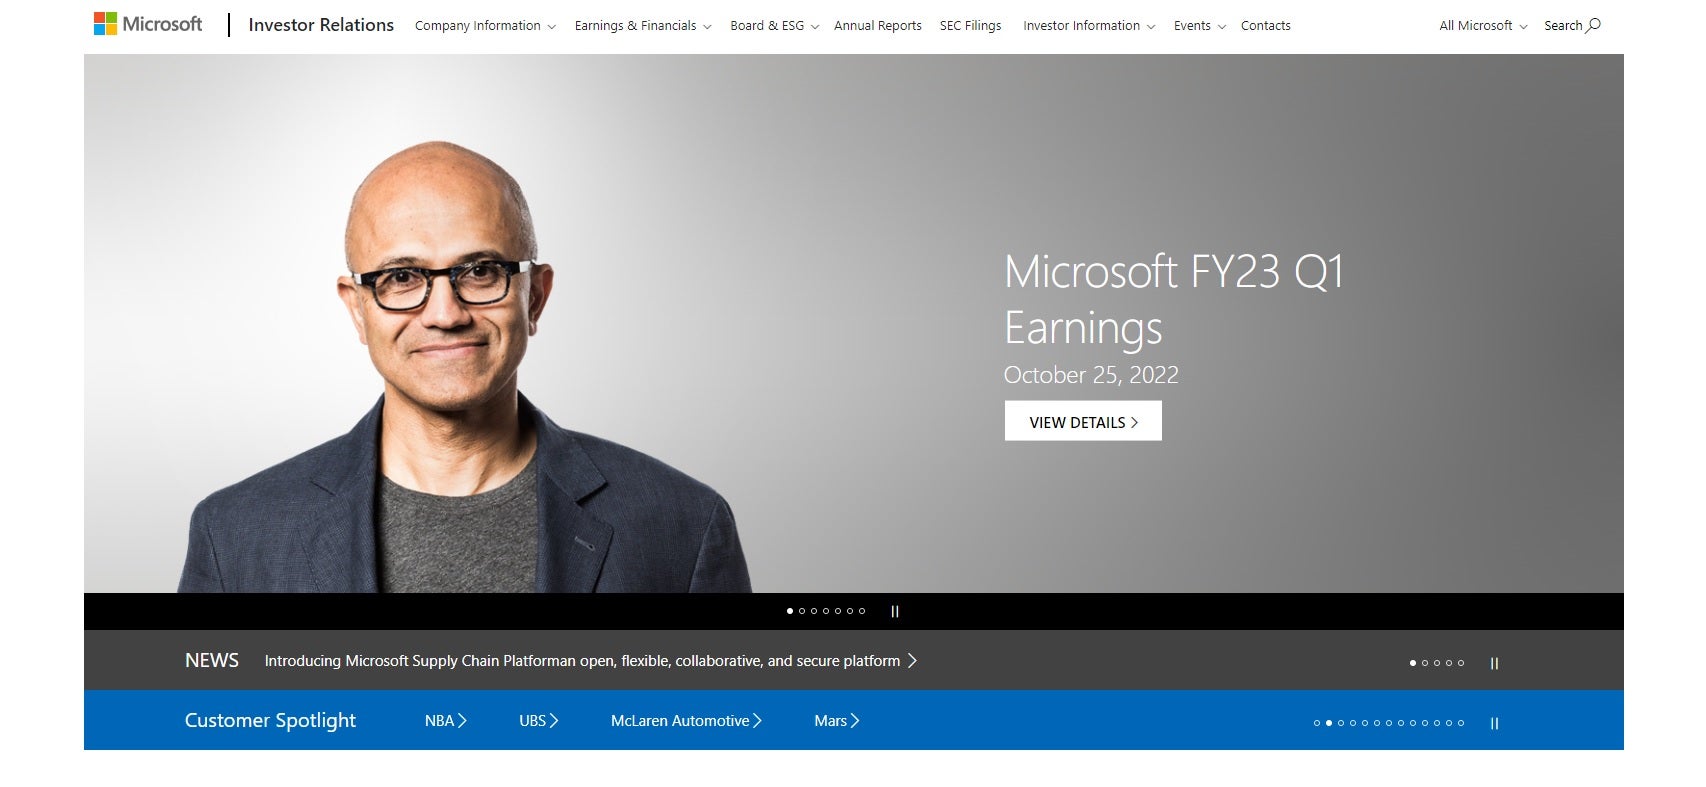 Microsoft's investor relations site, with a picture of CEO Satya Nadella next to a link to the Q1 earnings